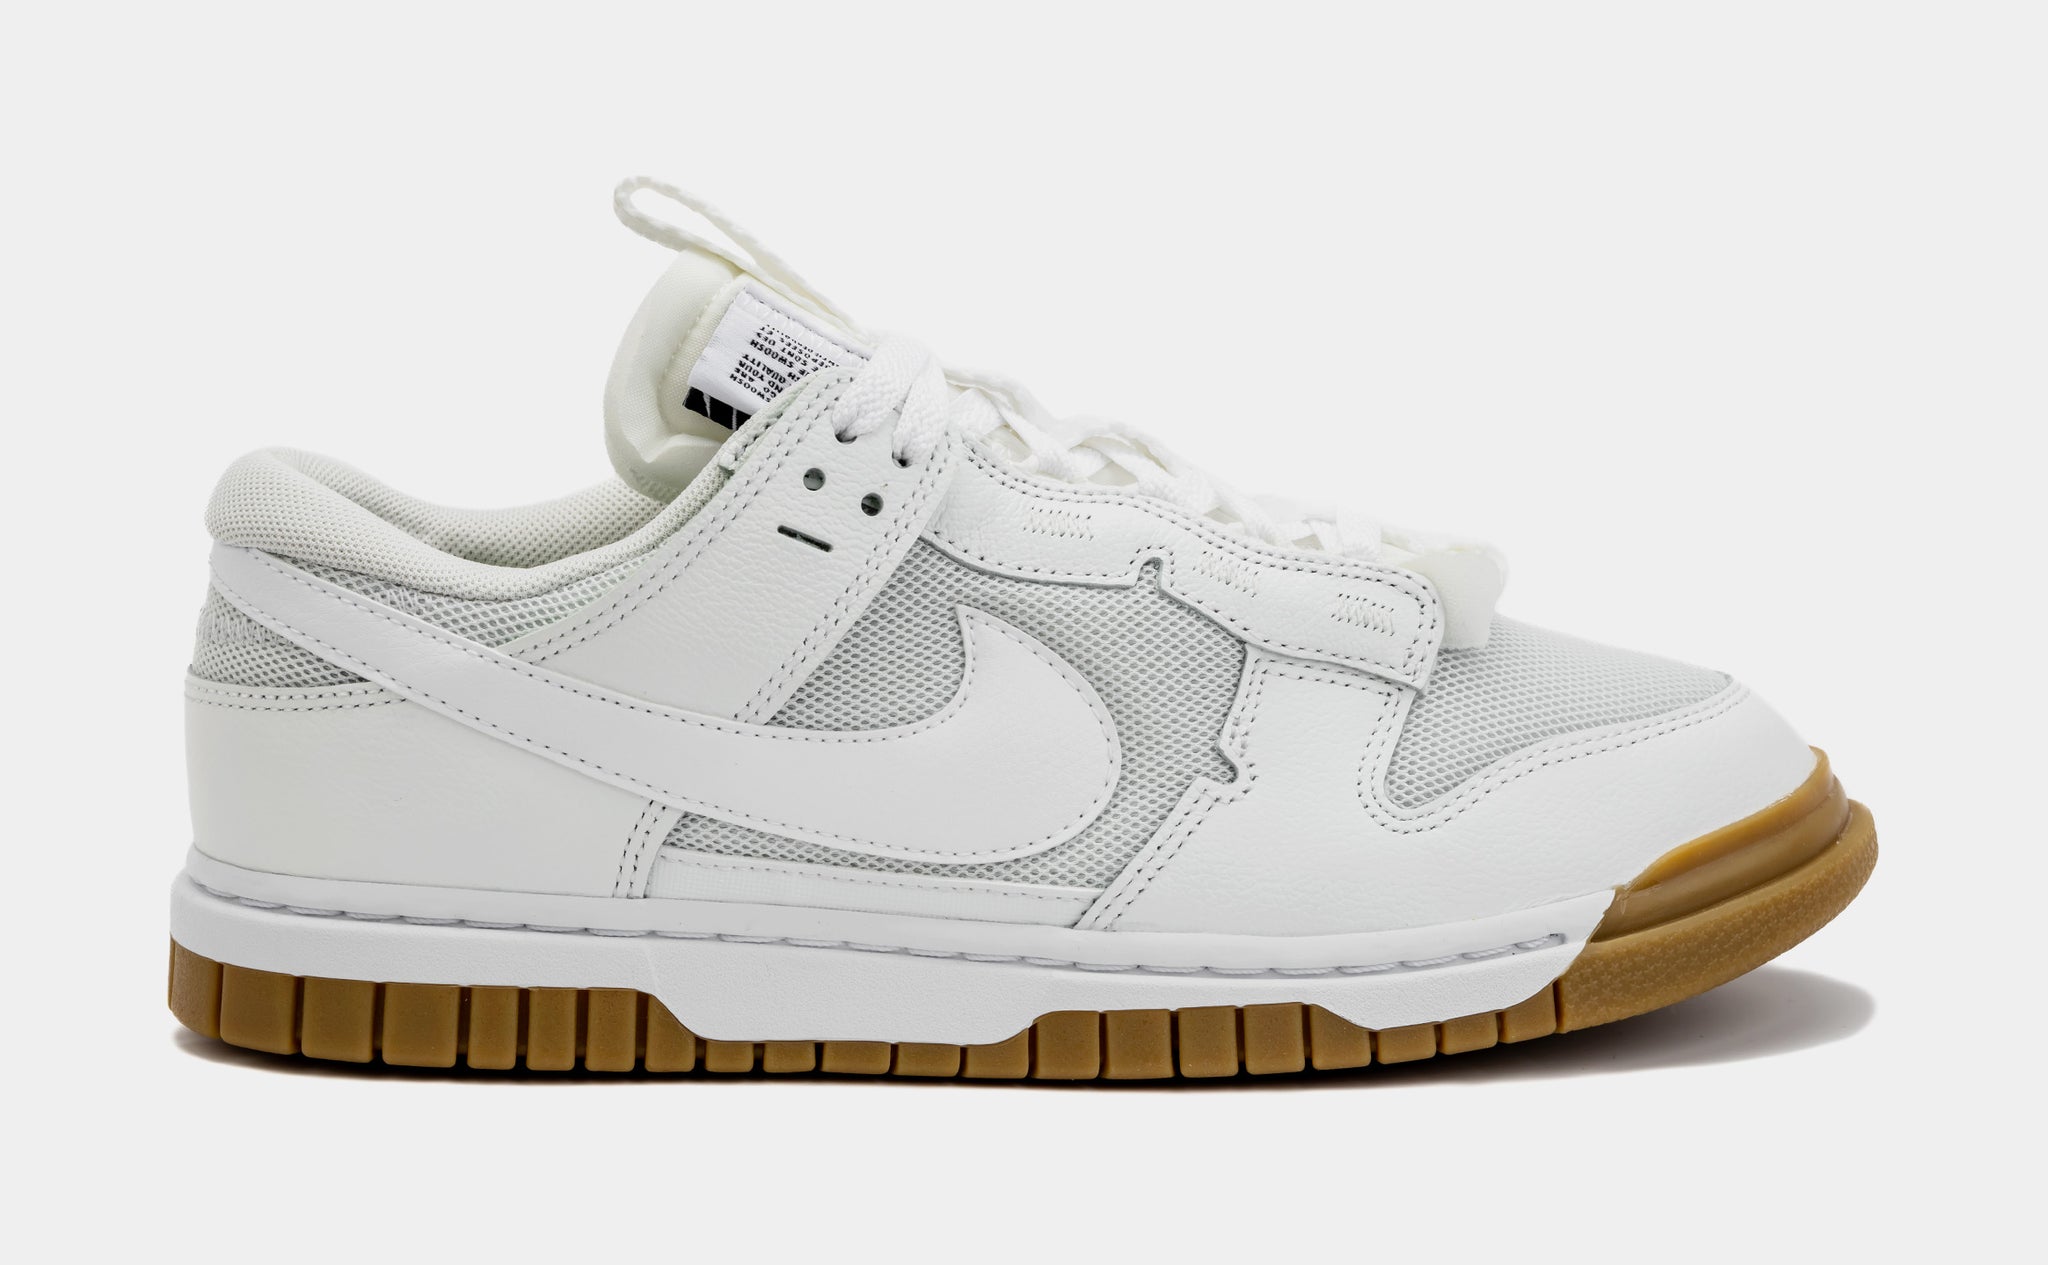 Nike Dunk Low Remastered White Gum Mens Lifestyle Shoes White